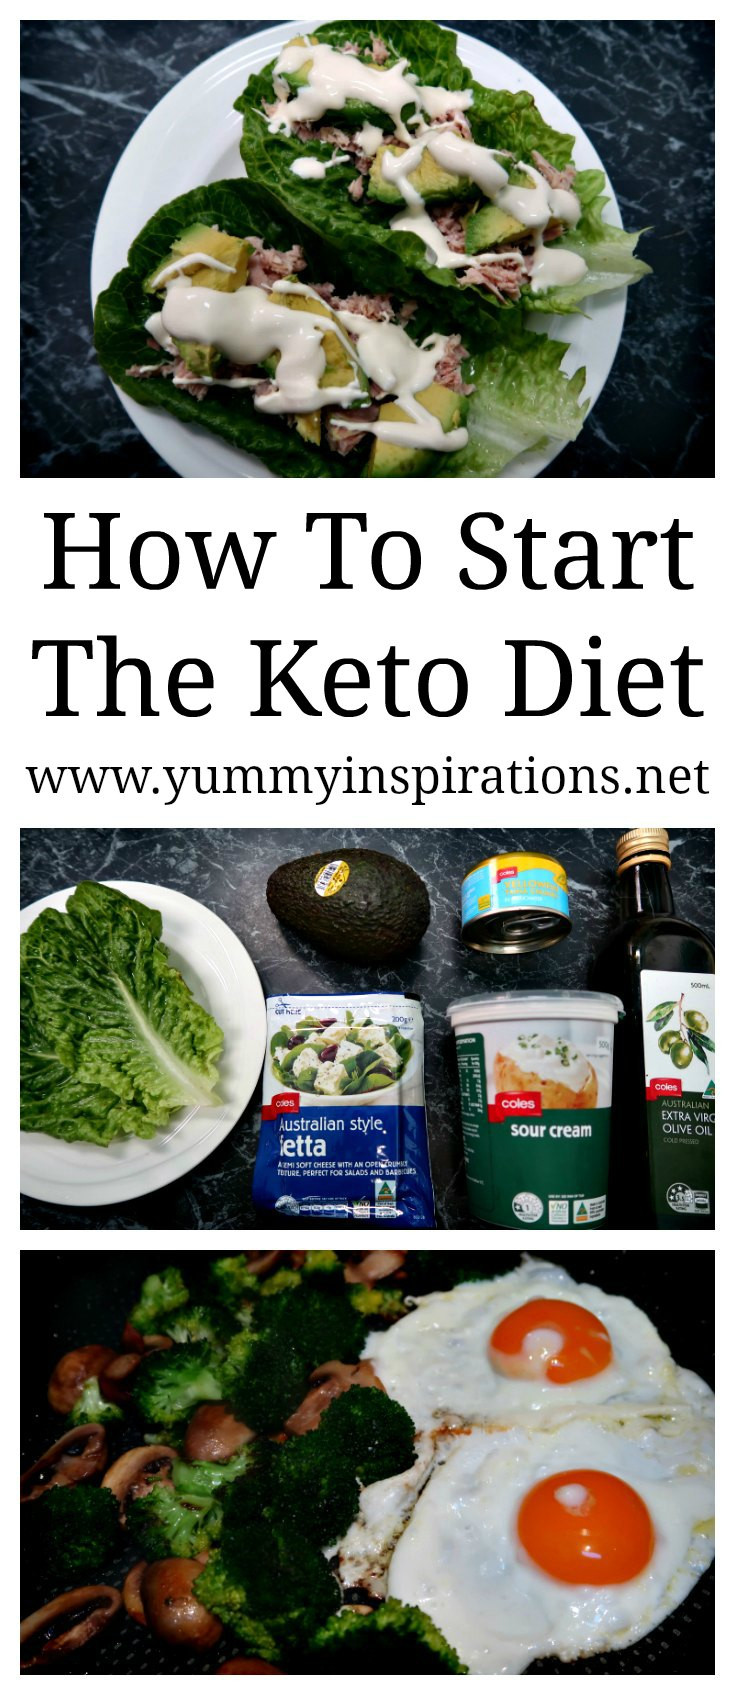 Beginning Ketosis Diet
 How To Start The Keto Diet Tips to help you started